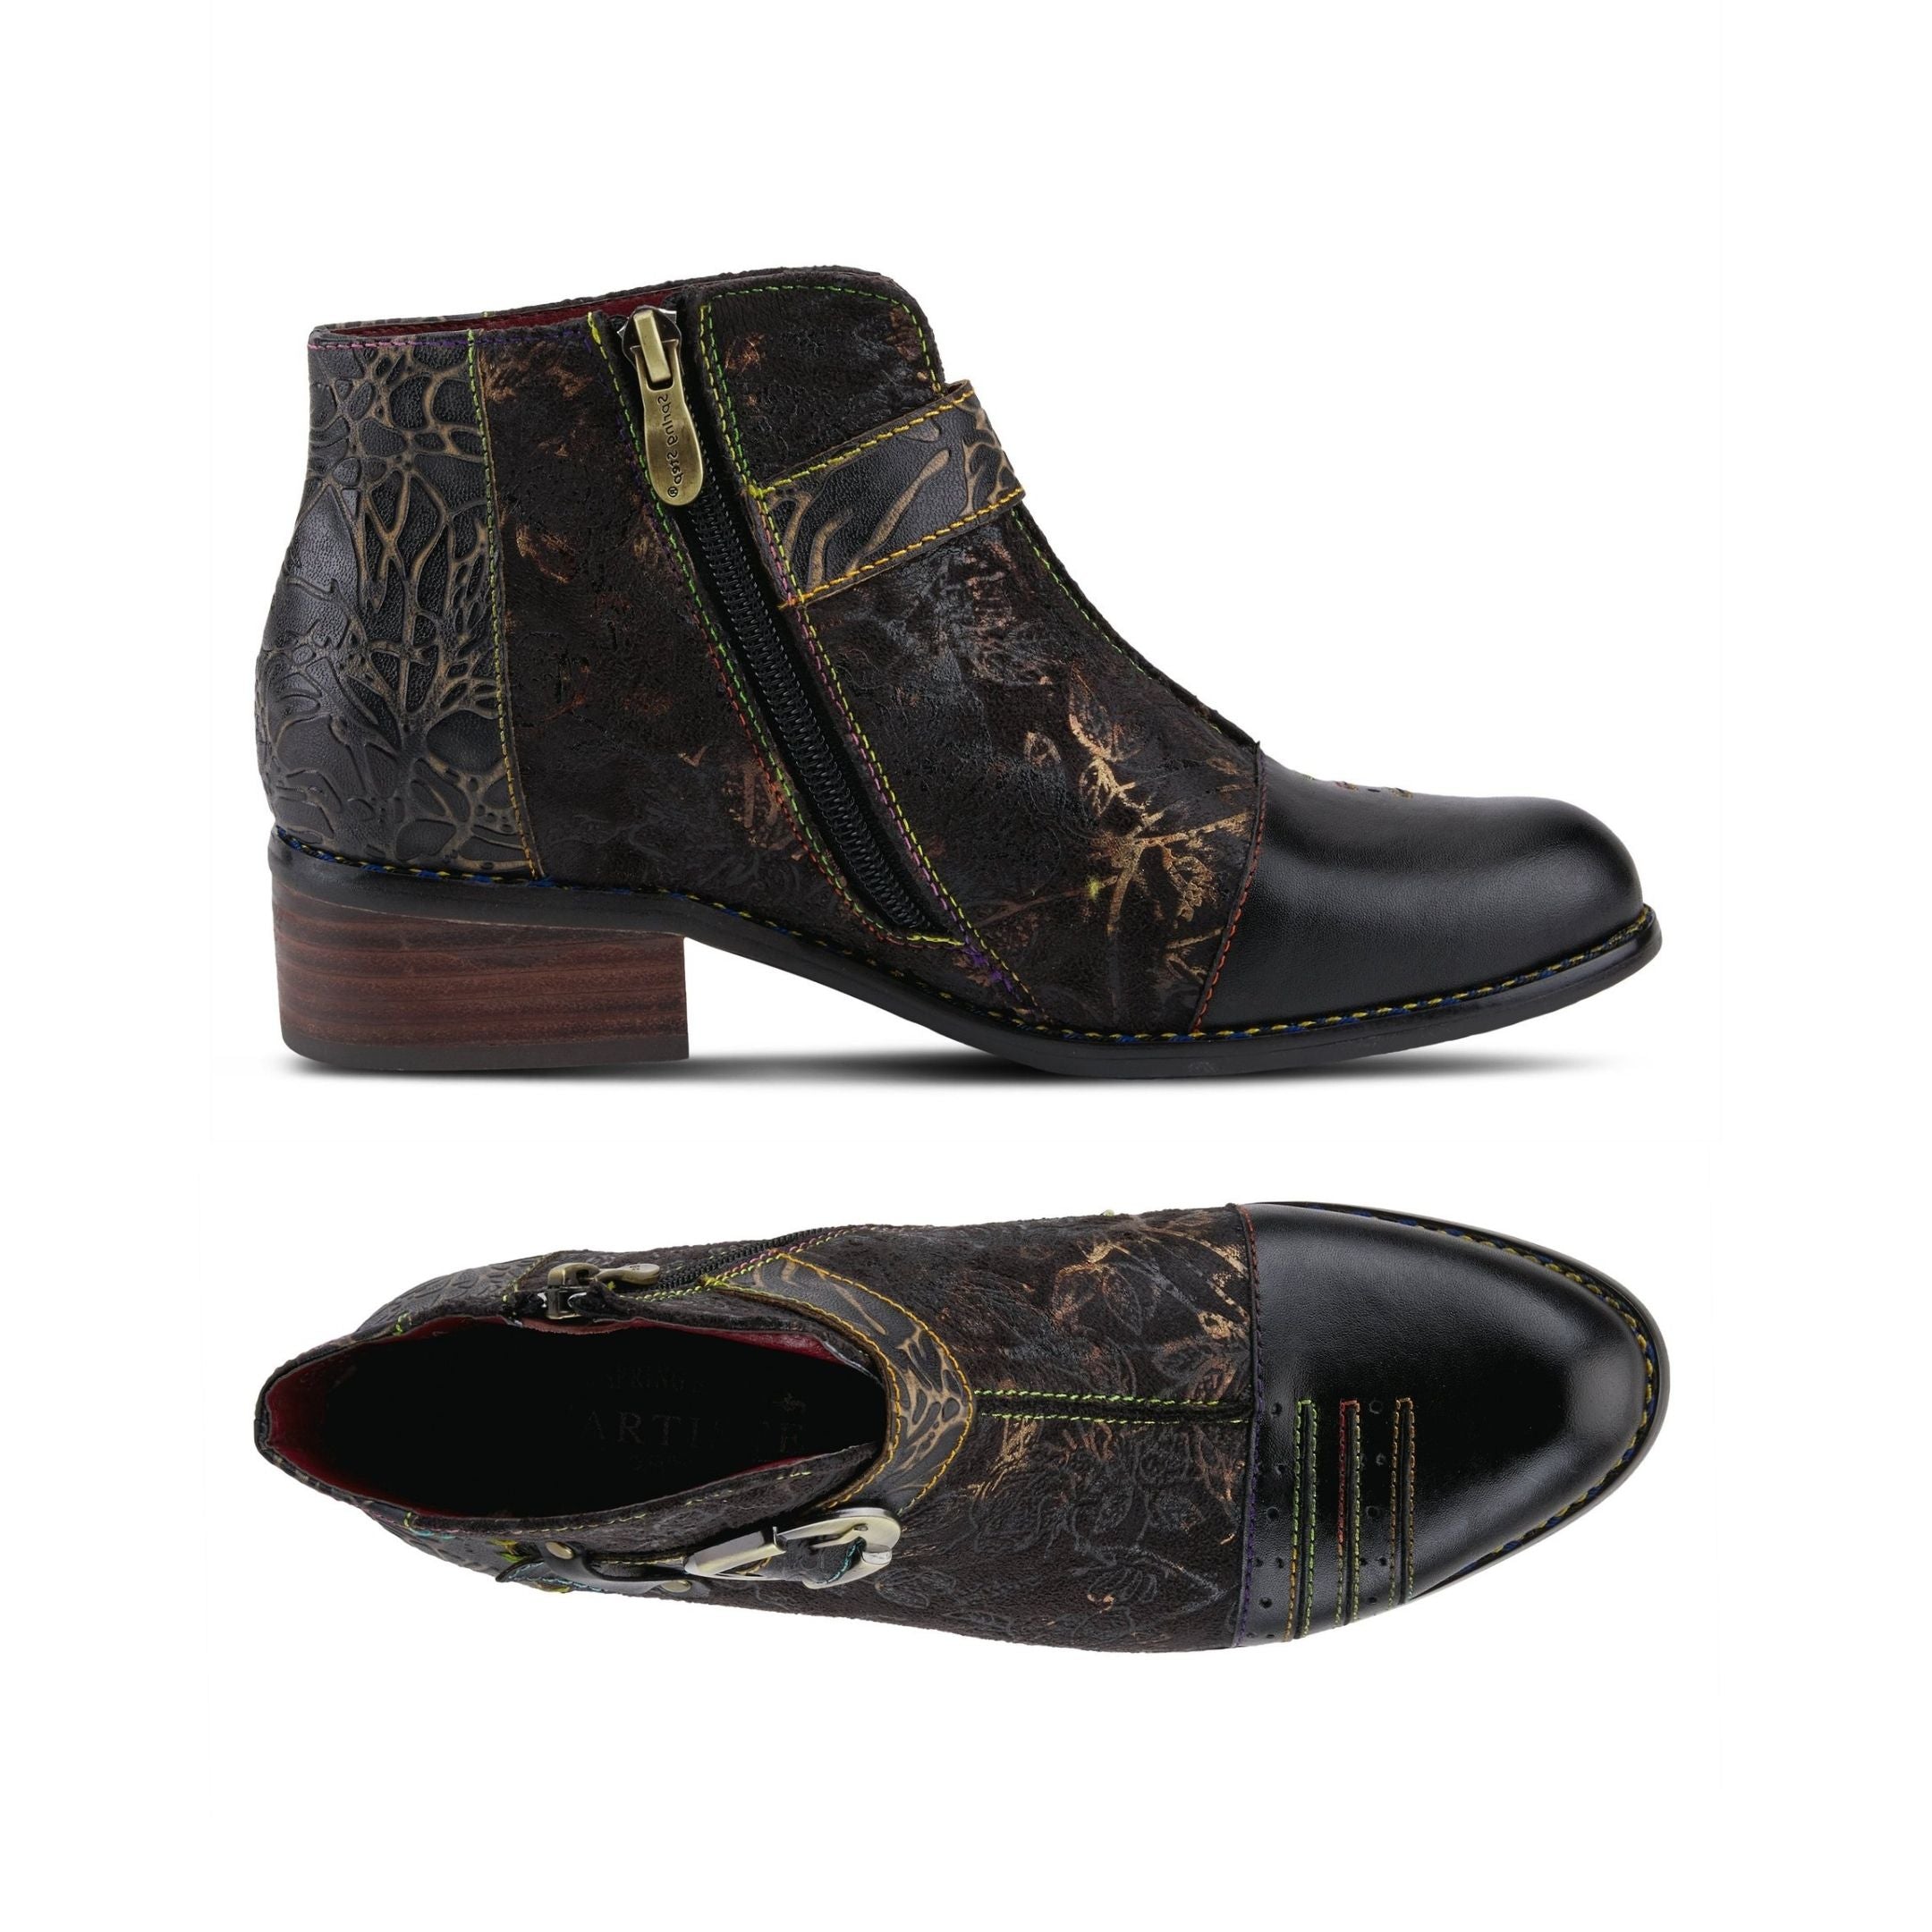 Black ankle boot with floral embossment and buckle detail